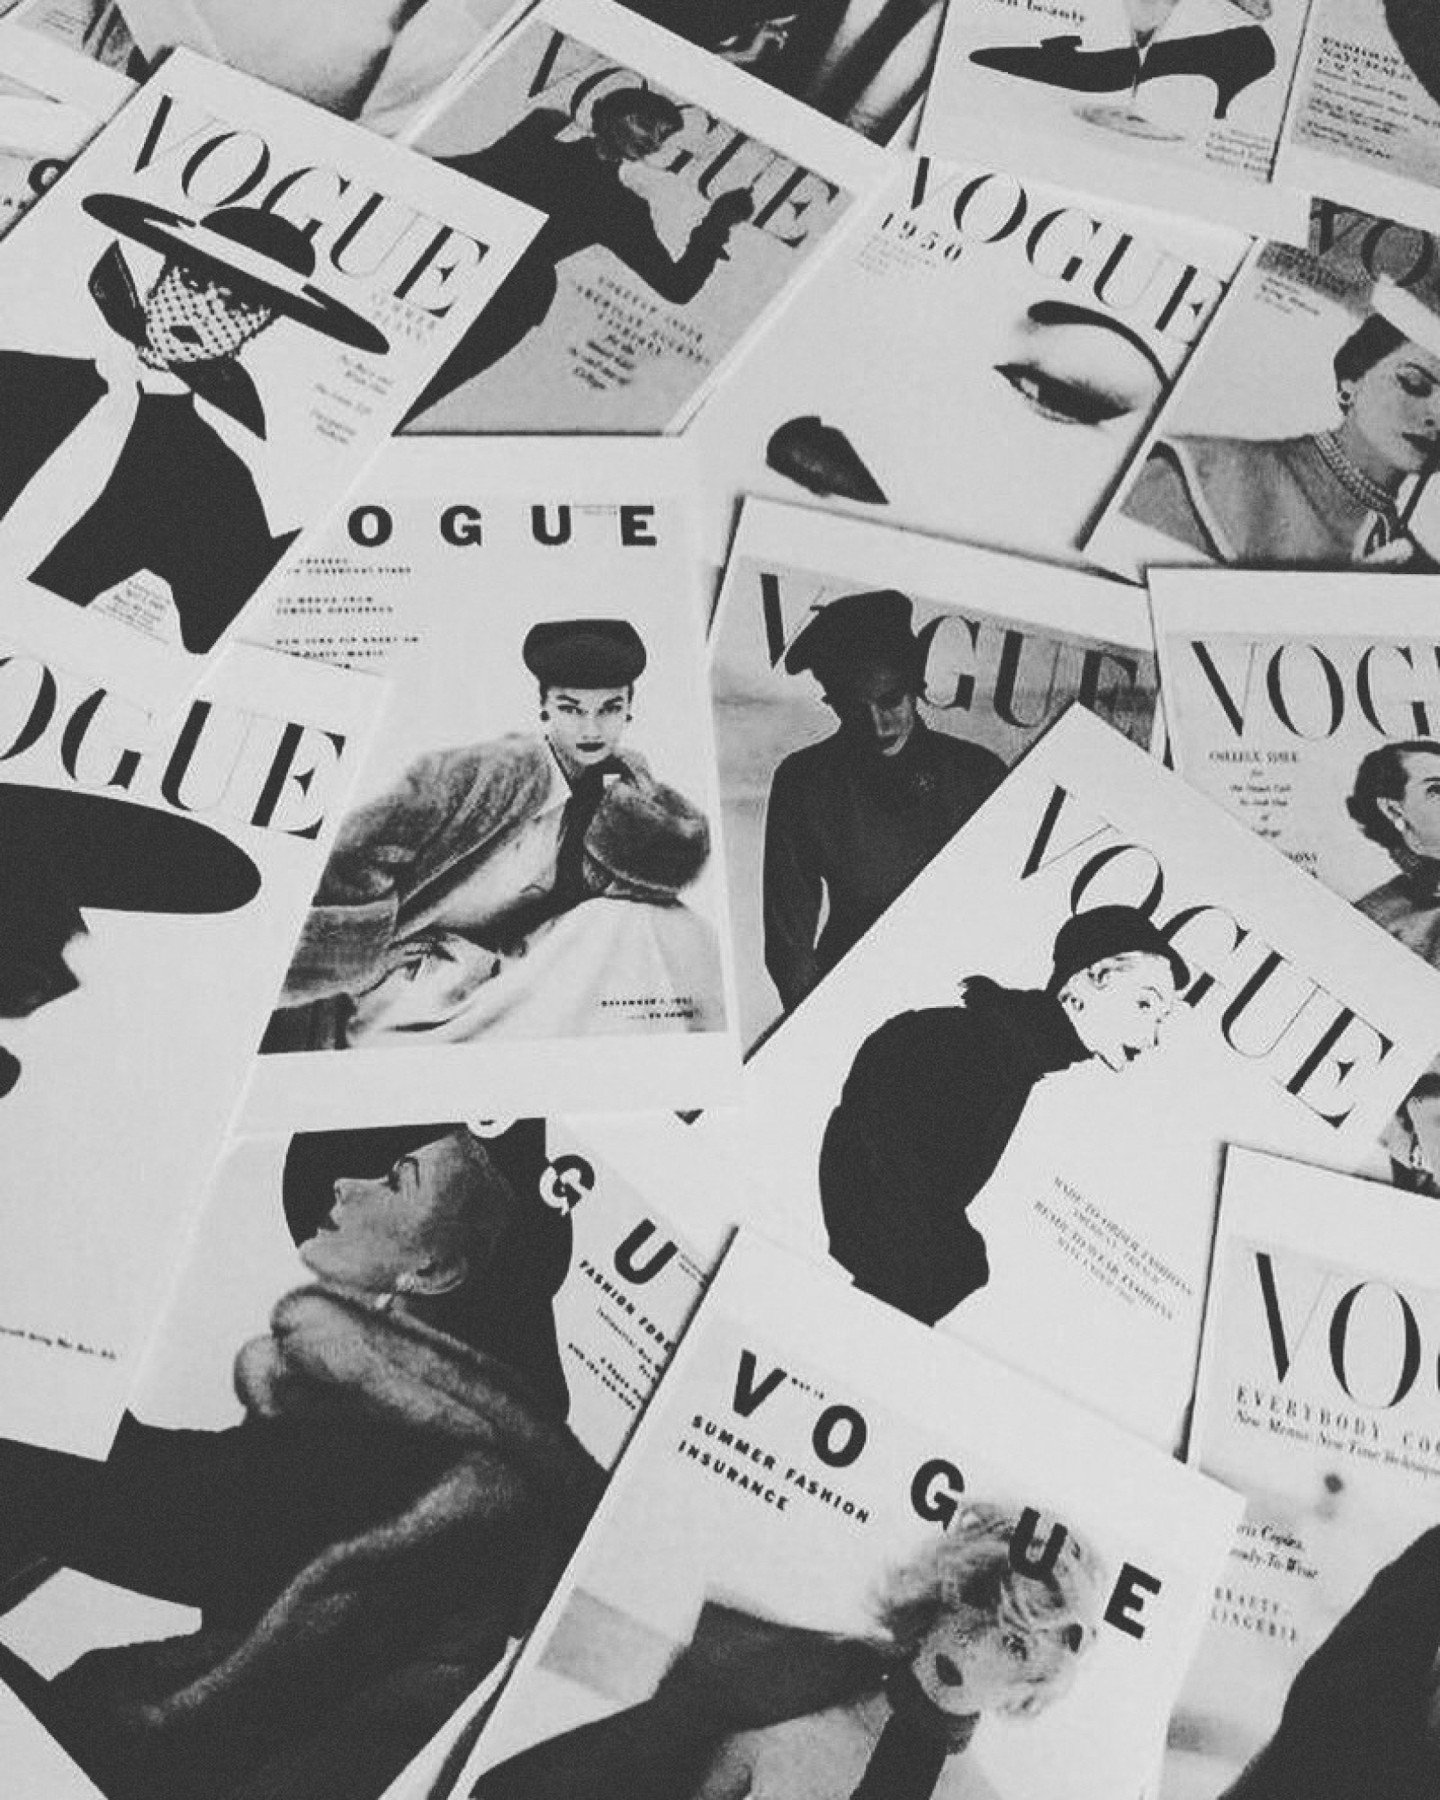 Timeless fashion made to order #bybelthelabel

#vogue